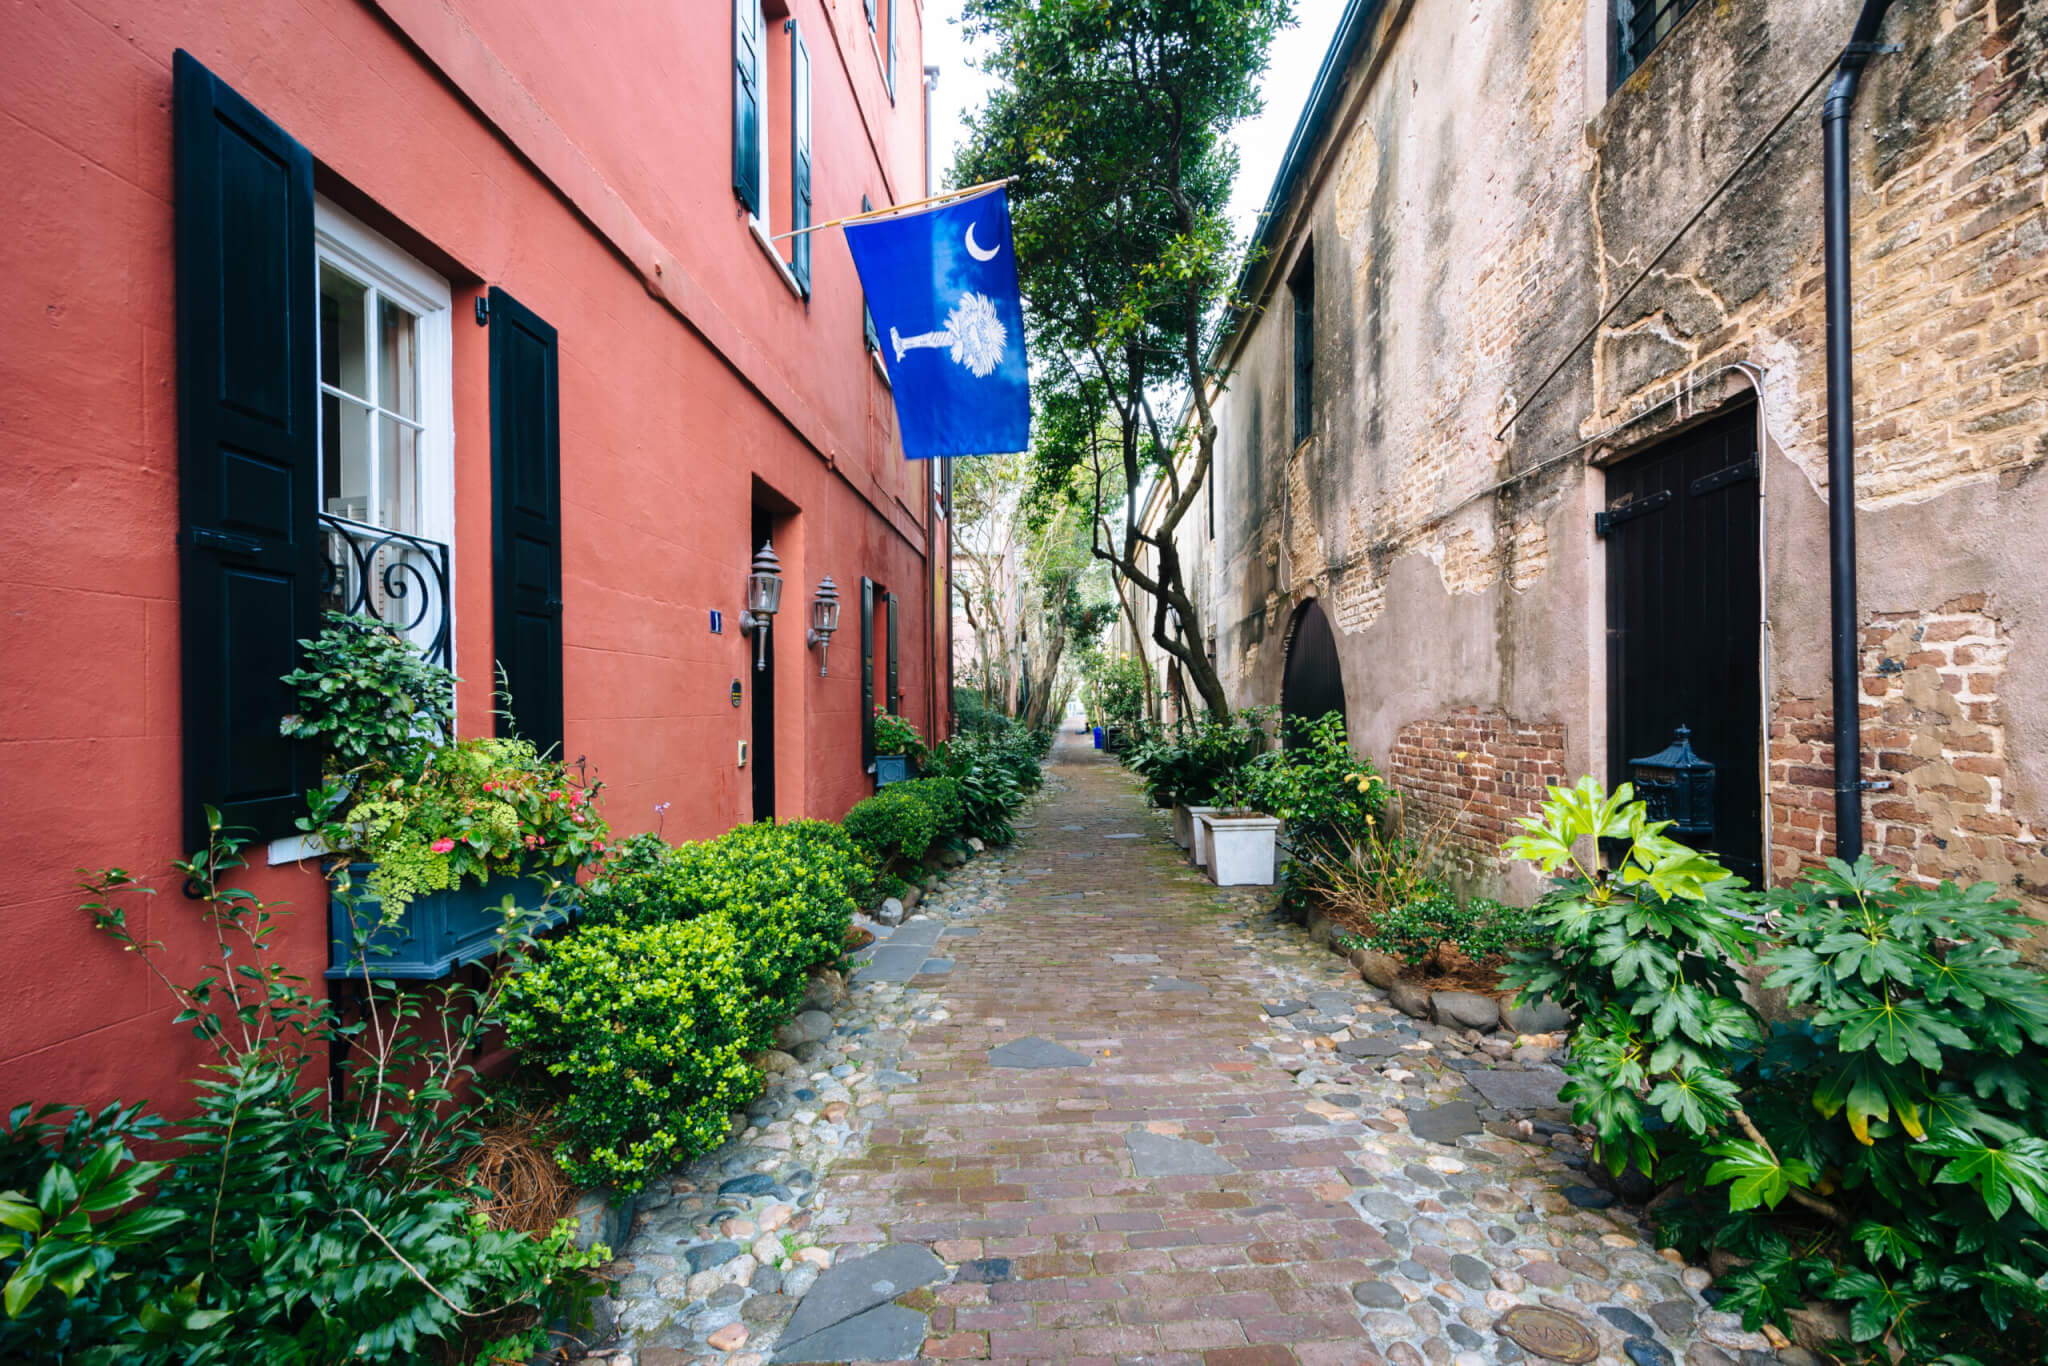 Narrow cobblestone street and old buildings in Charleston, South